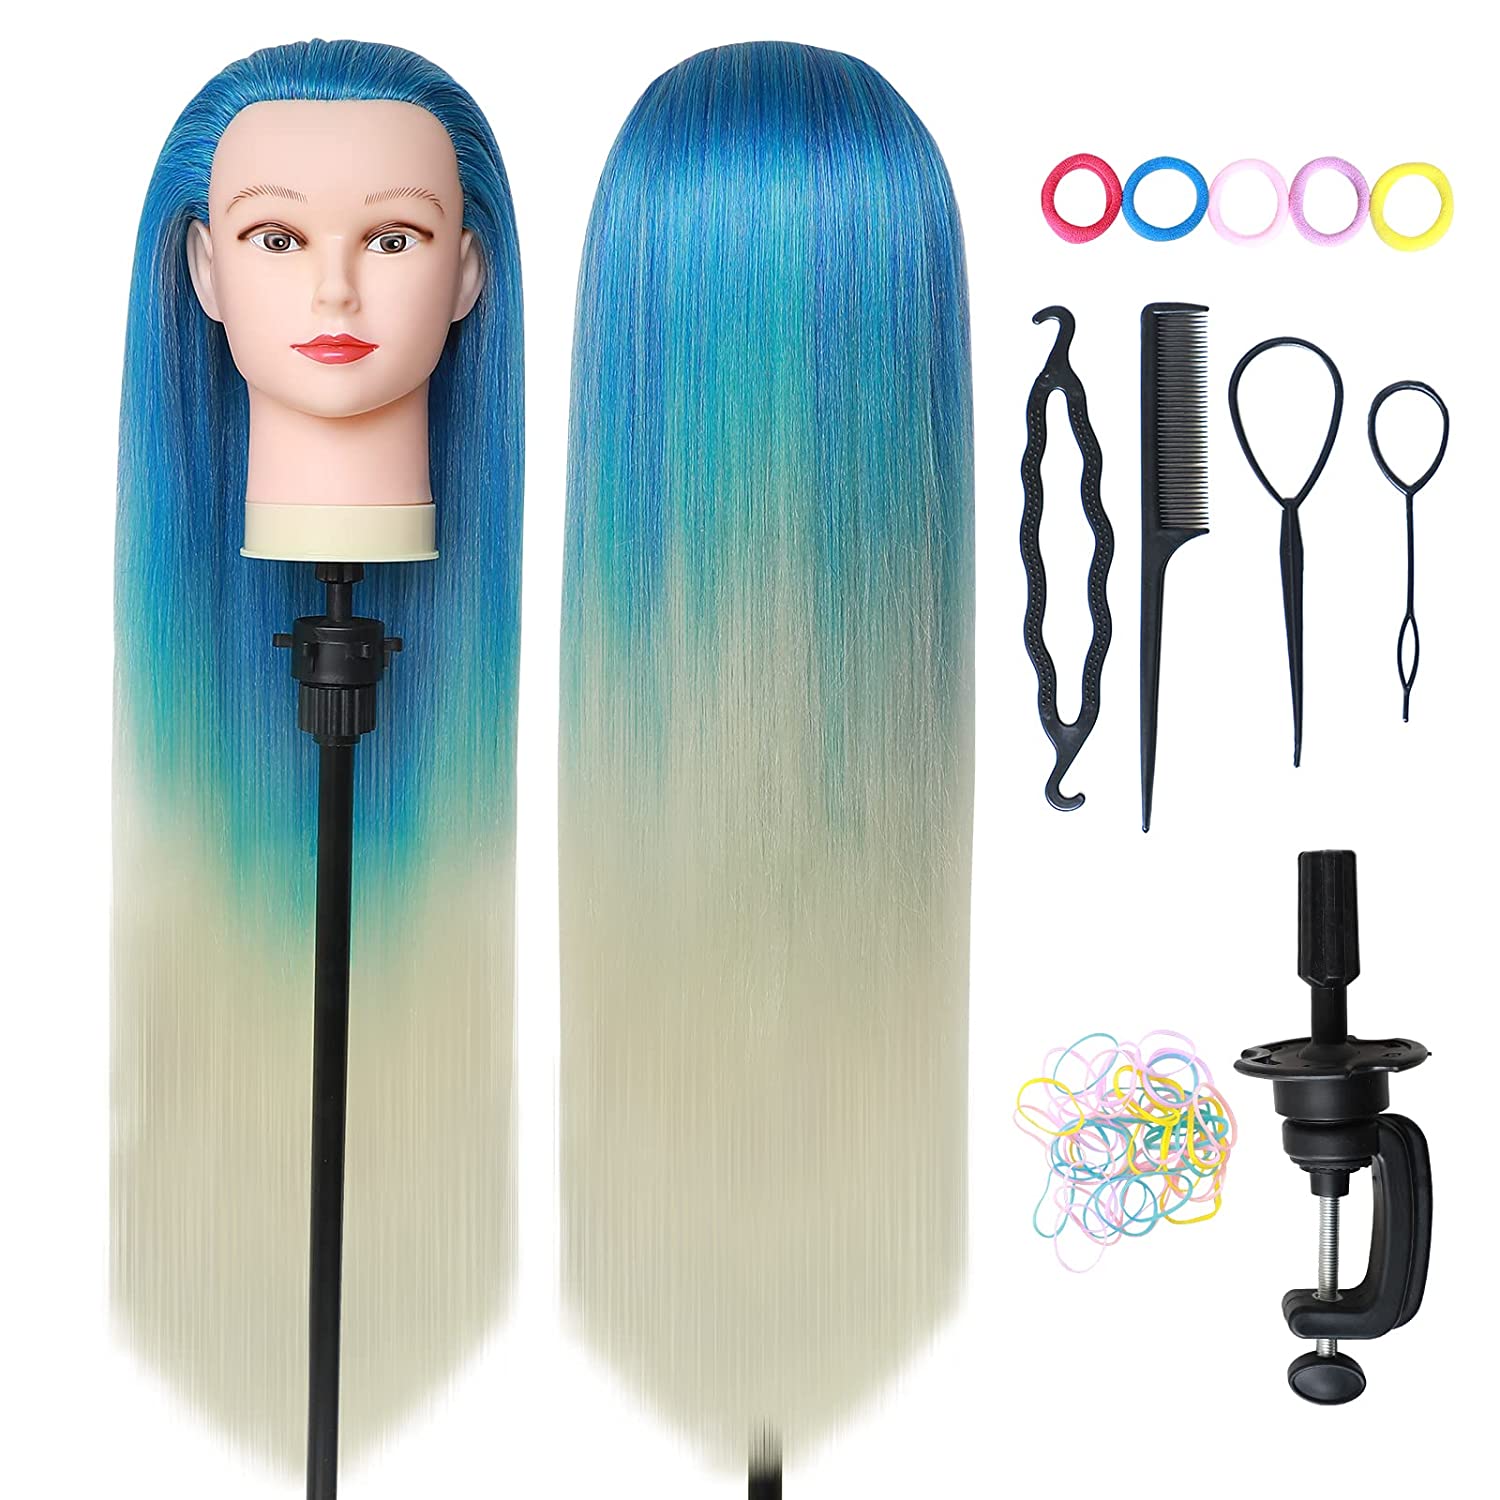 Doll Head For Styling 26-28 Inch Hairdressing Head, Training Heads, 100% Synthetic  Hair Wig Head With Holder + Diy Hair Accessories Styling Set